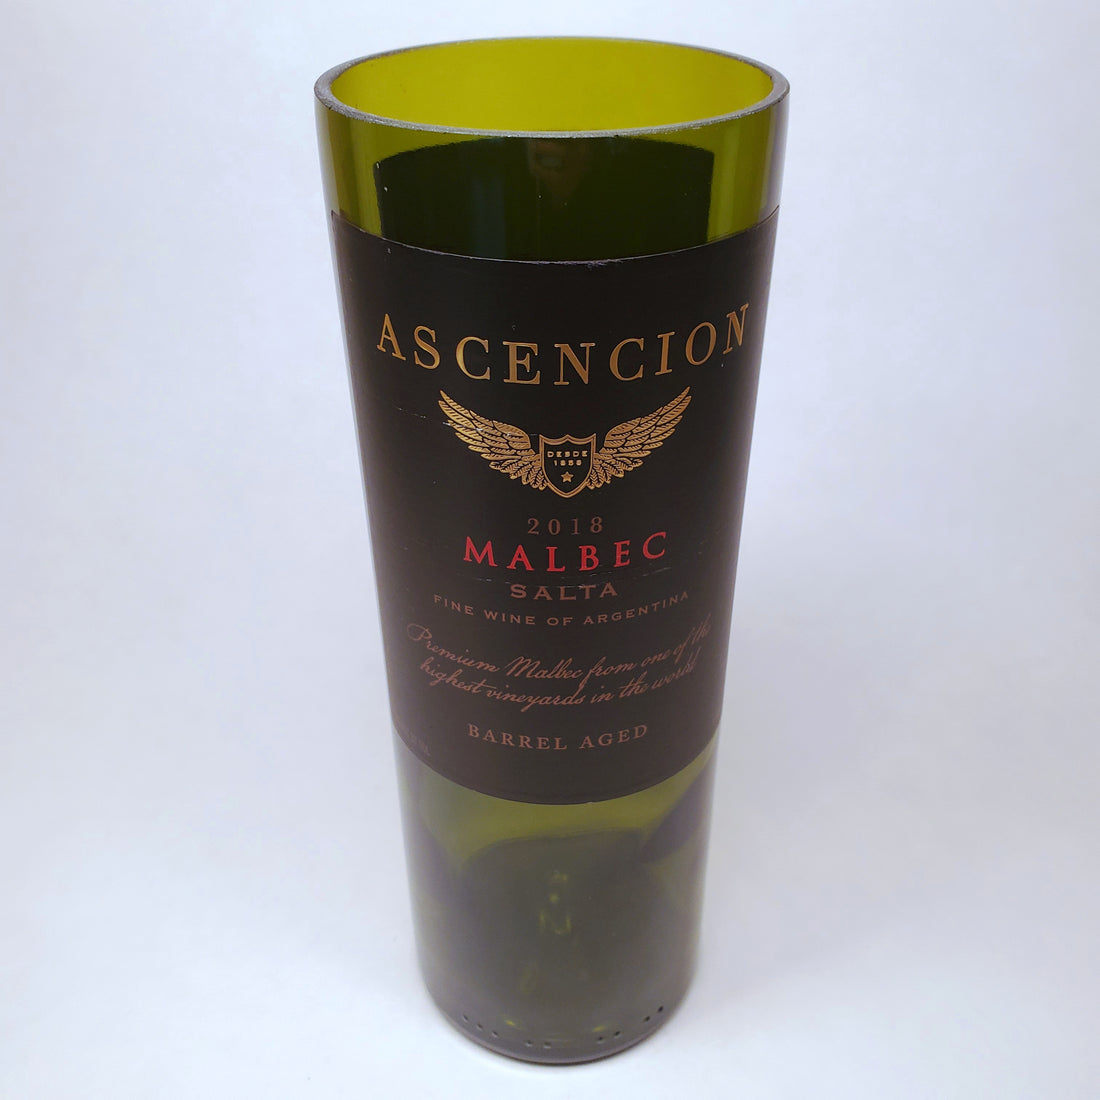 Ascencion Malbec 2018 Salta, Argentina Hand Cut Upcycled Wine Bottle Candle - Choose Your Scent